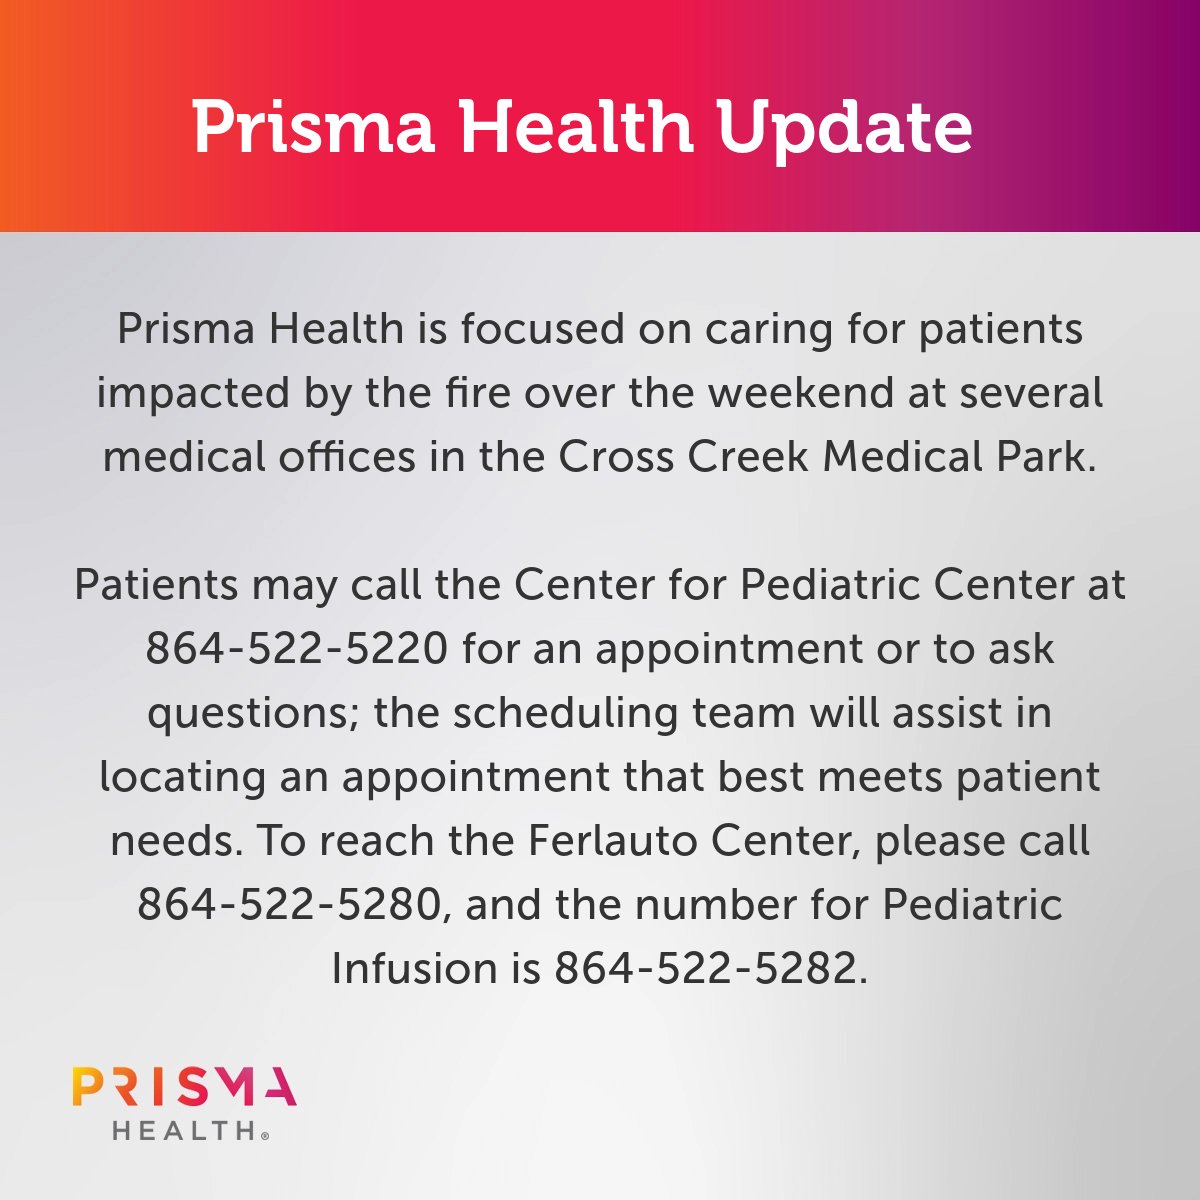 Prisma Health is focused on caring for patients impacted by the fire over the weekend at several medical offices in the Cross Creek Medical Park. Patients may call the practices on a unified phone line at 864-522-5220 for an appointment. bit.ly/4aBabmI